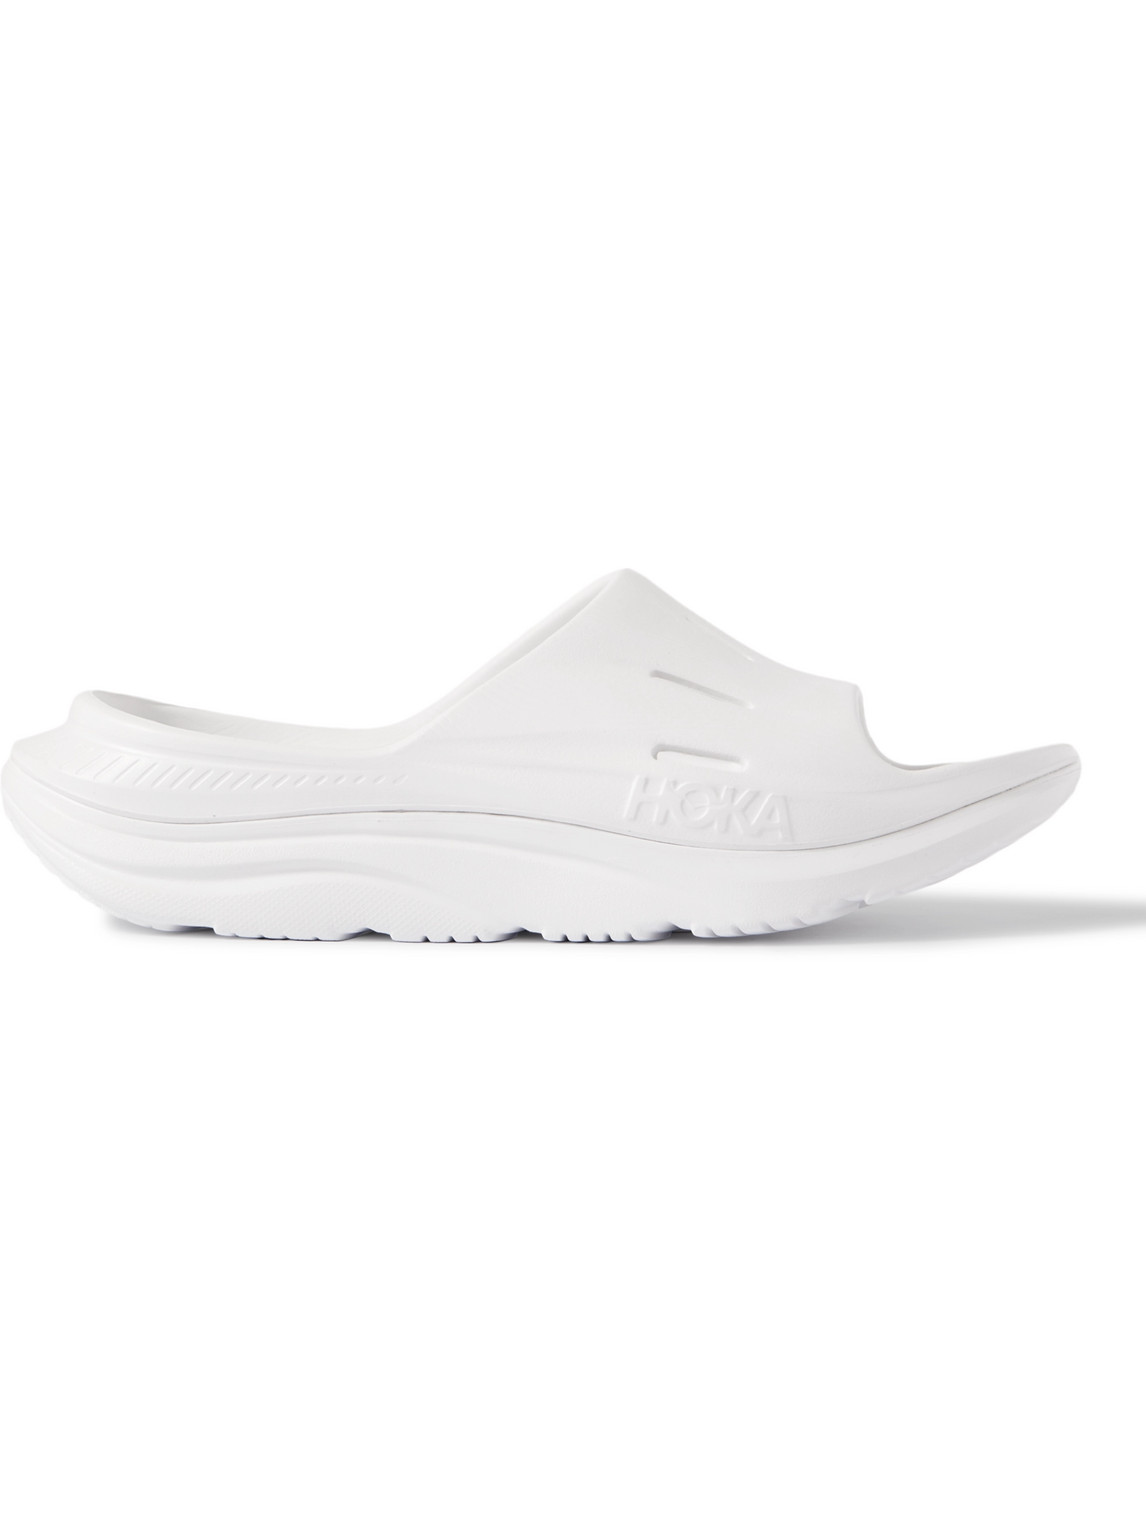 Hoka One One Ora Recovery 3 Rubber Slides In White